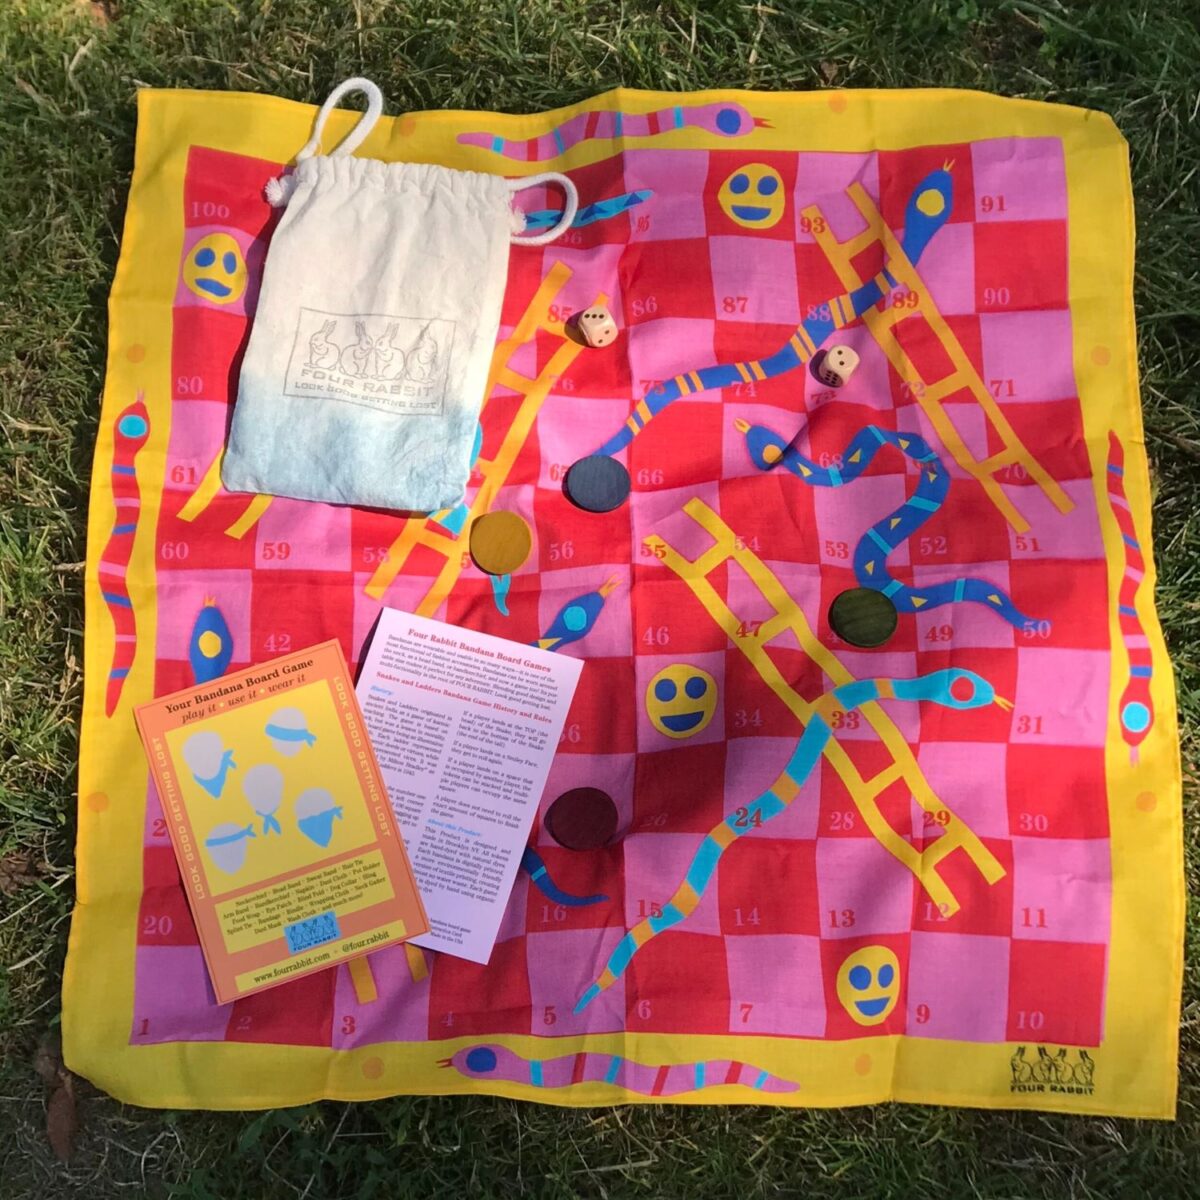 Snakes and Ladders Bandana Board Game